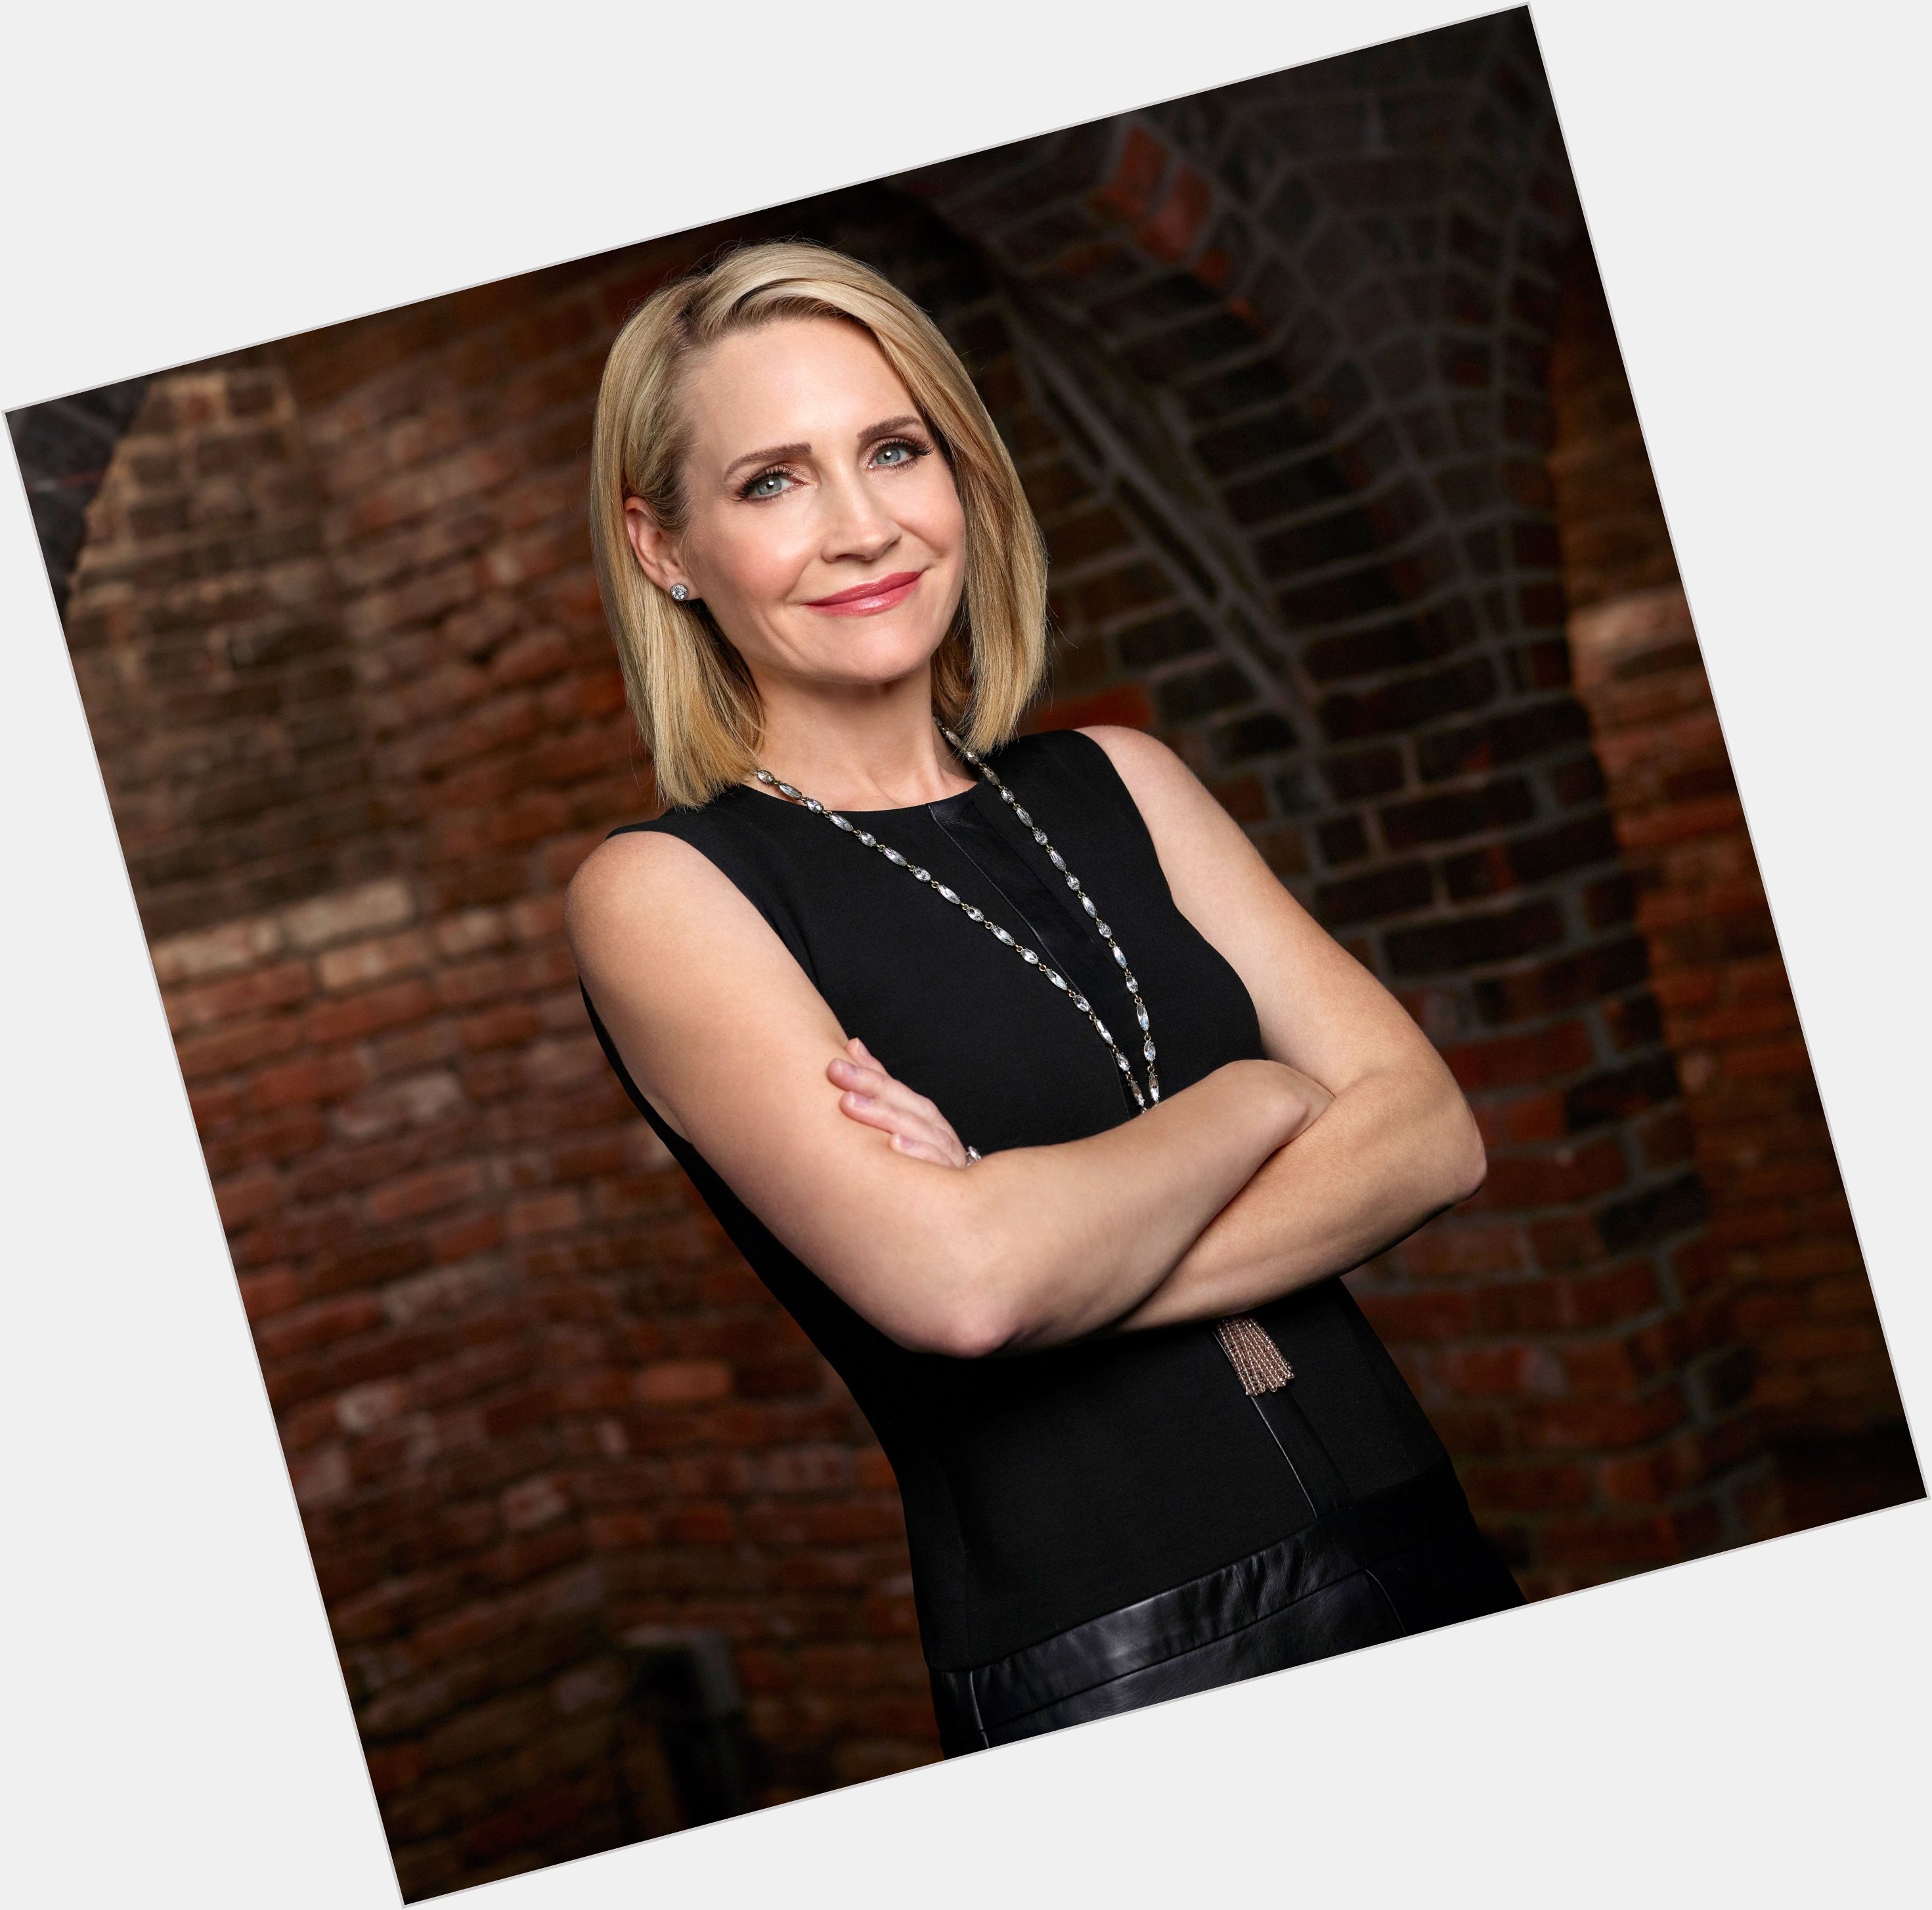 Andrea canning sexy